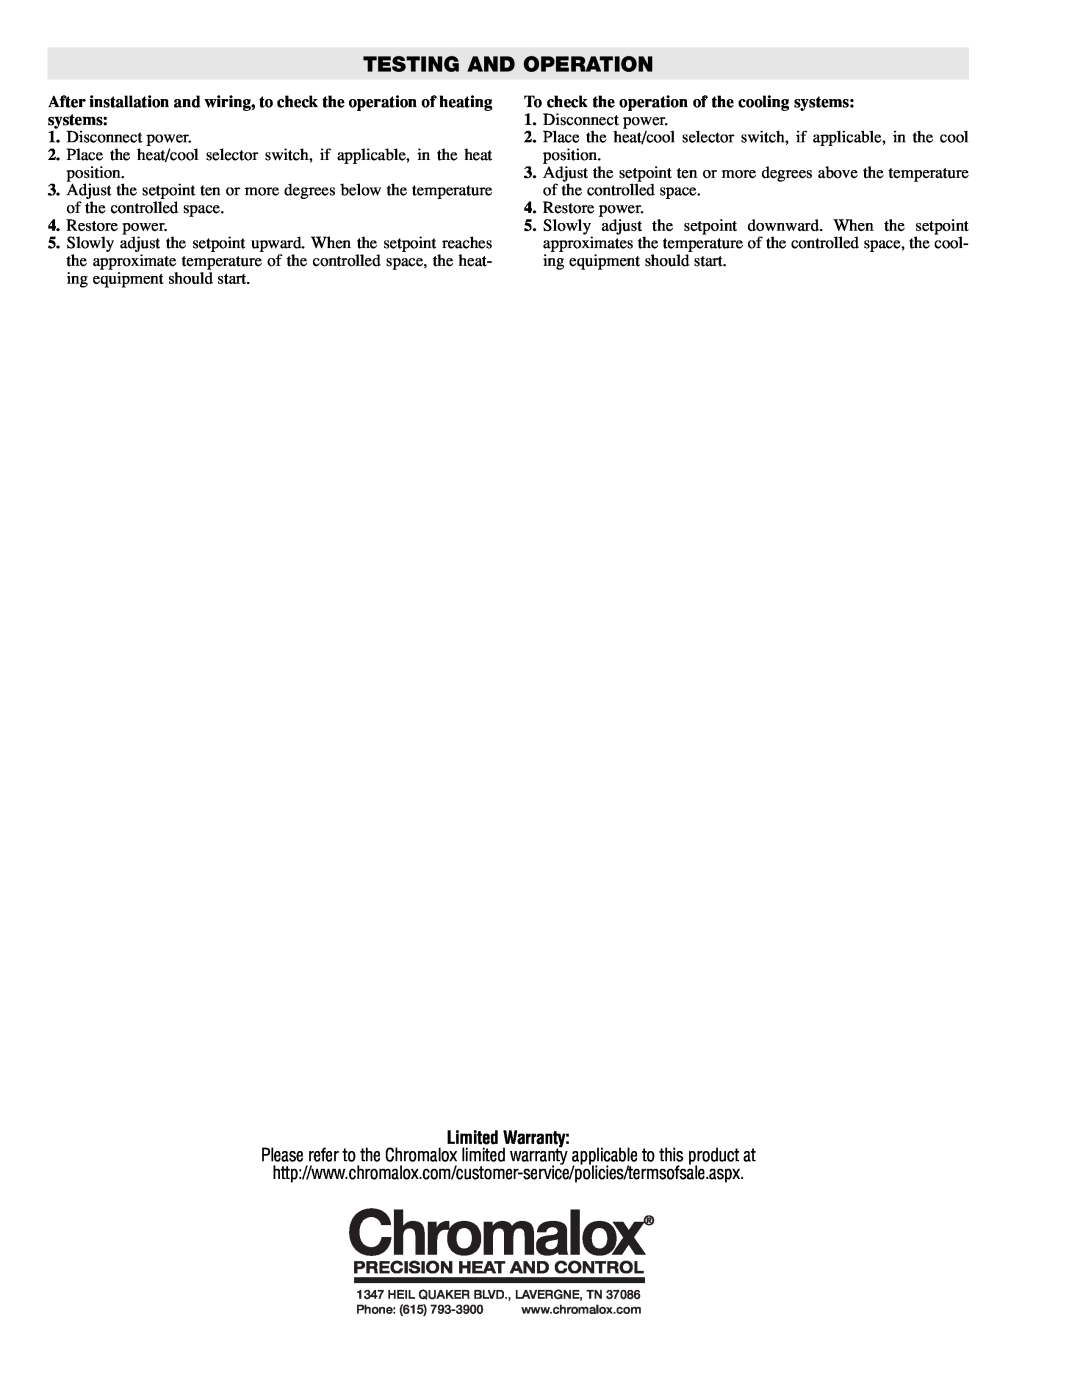 Chromalox PK471-4 specifications Testing And Operation, Limited Warranty, To check the operation of the cooling systems 